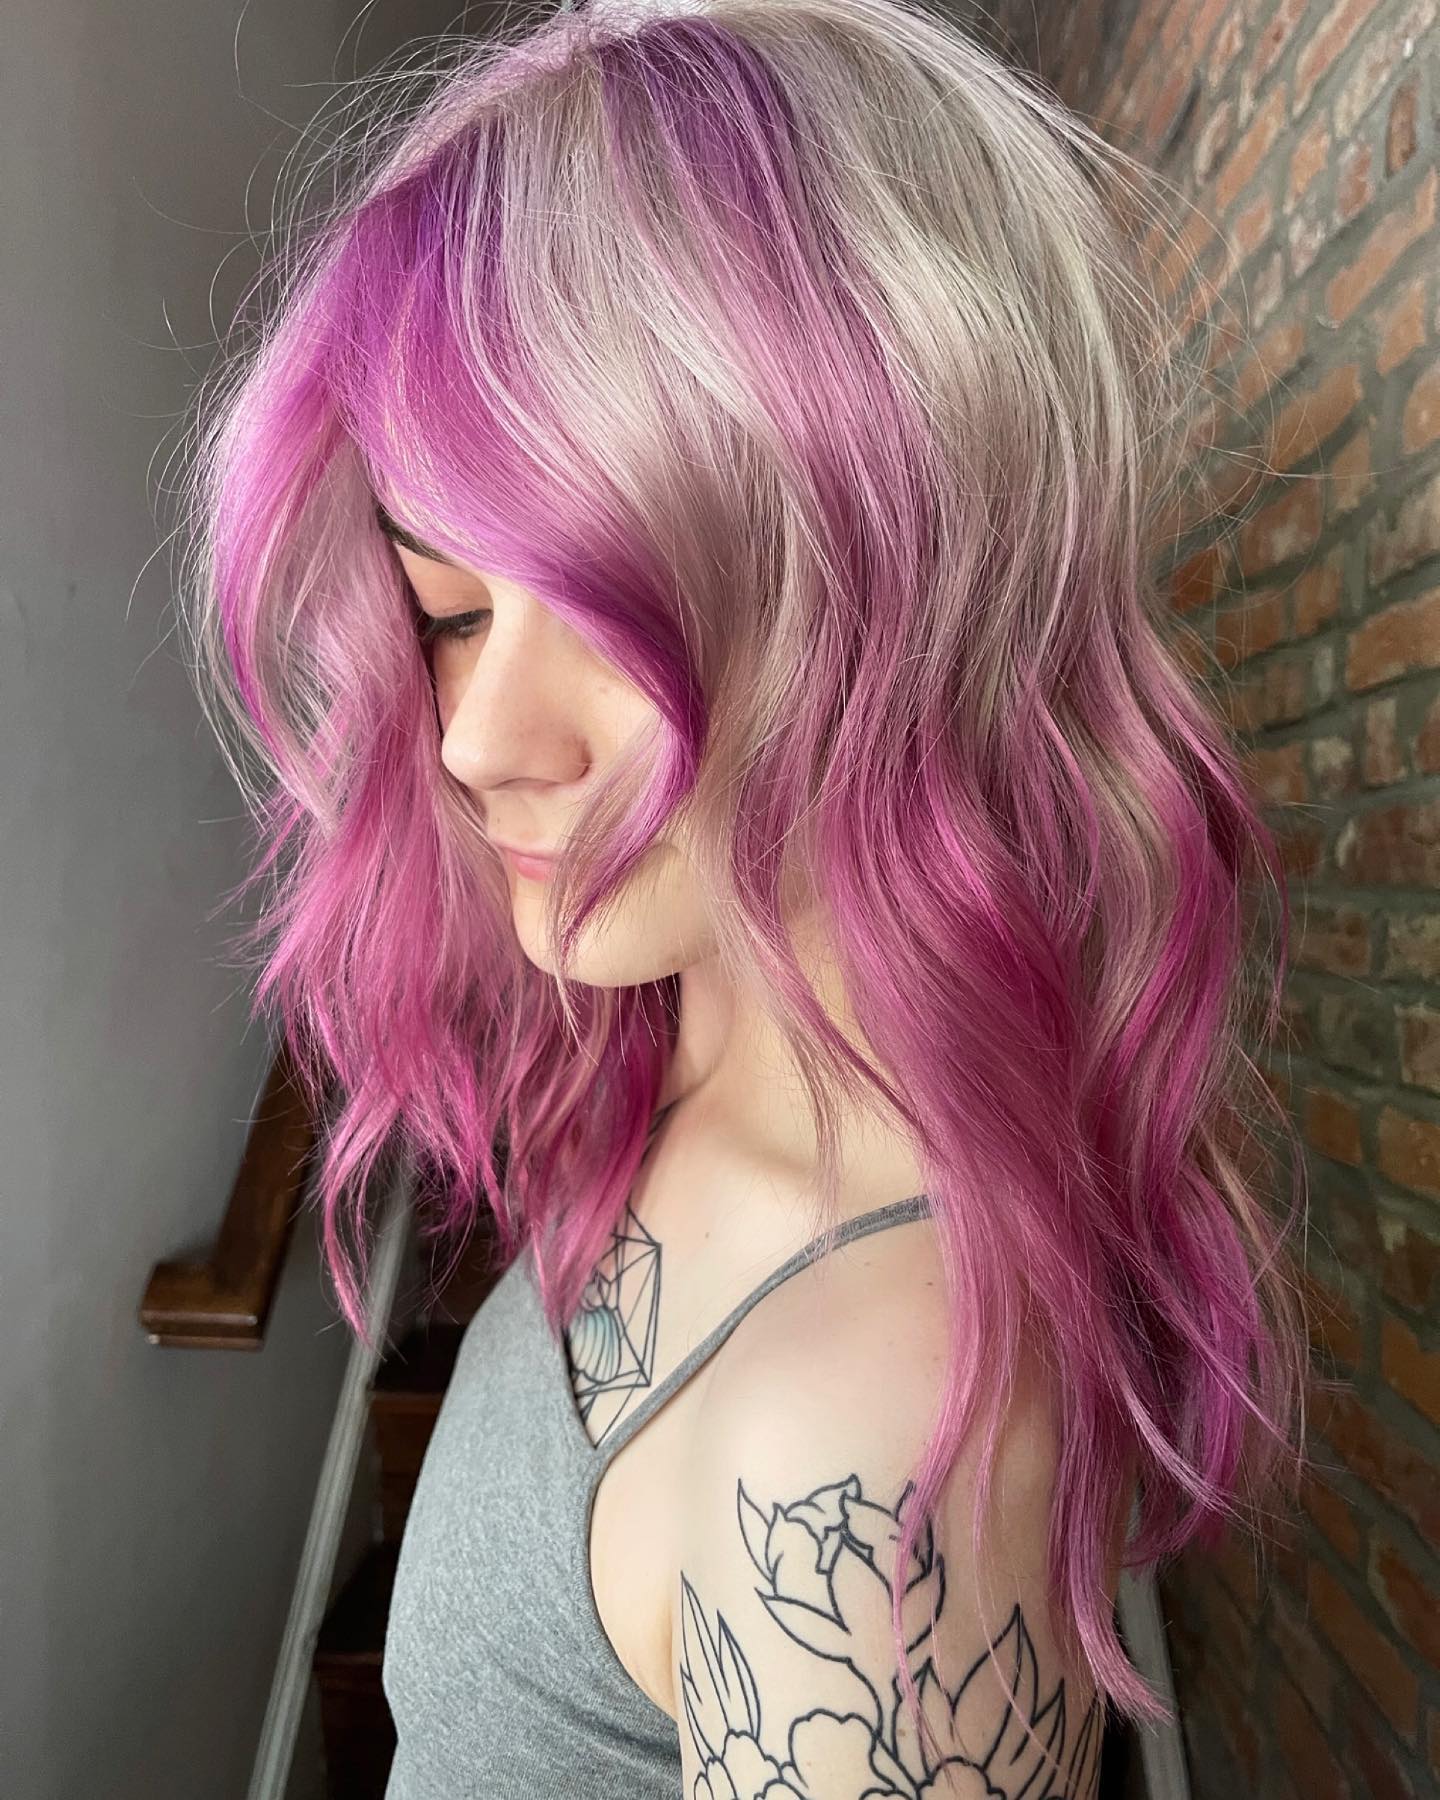 Light Blonde with Bright Pink Highlights